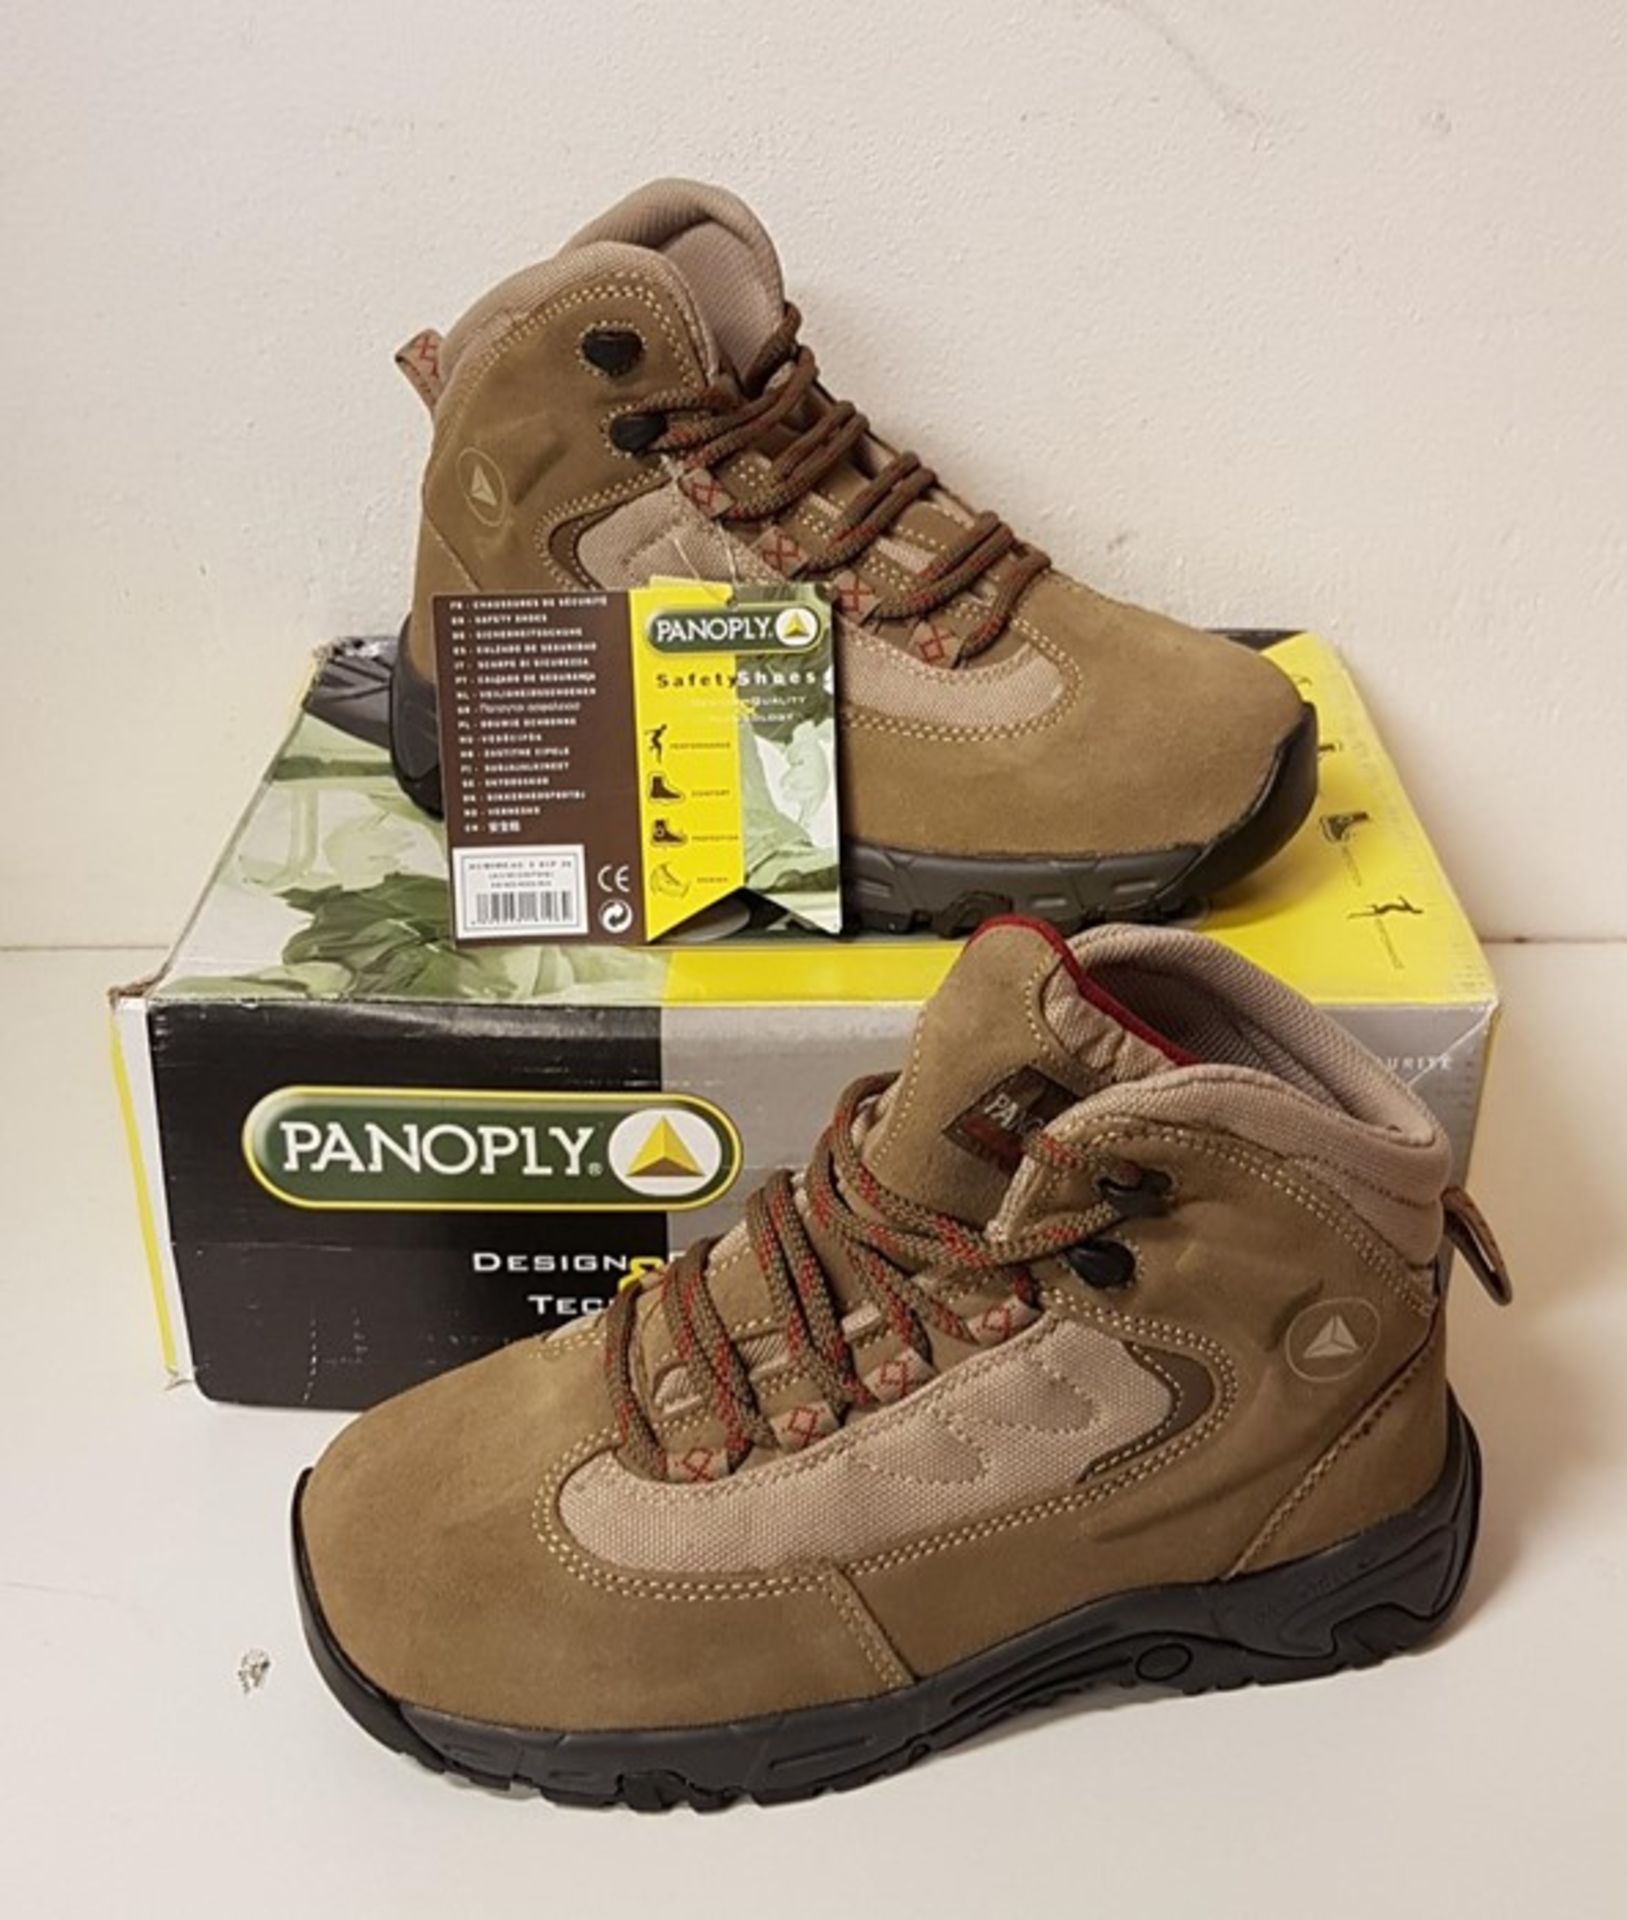 1 BOXED PANOPLY SAFETY BOOTS IN BEIGE HIGH ANKLE,